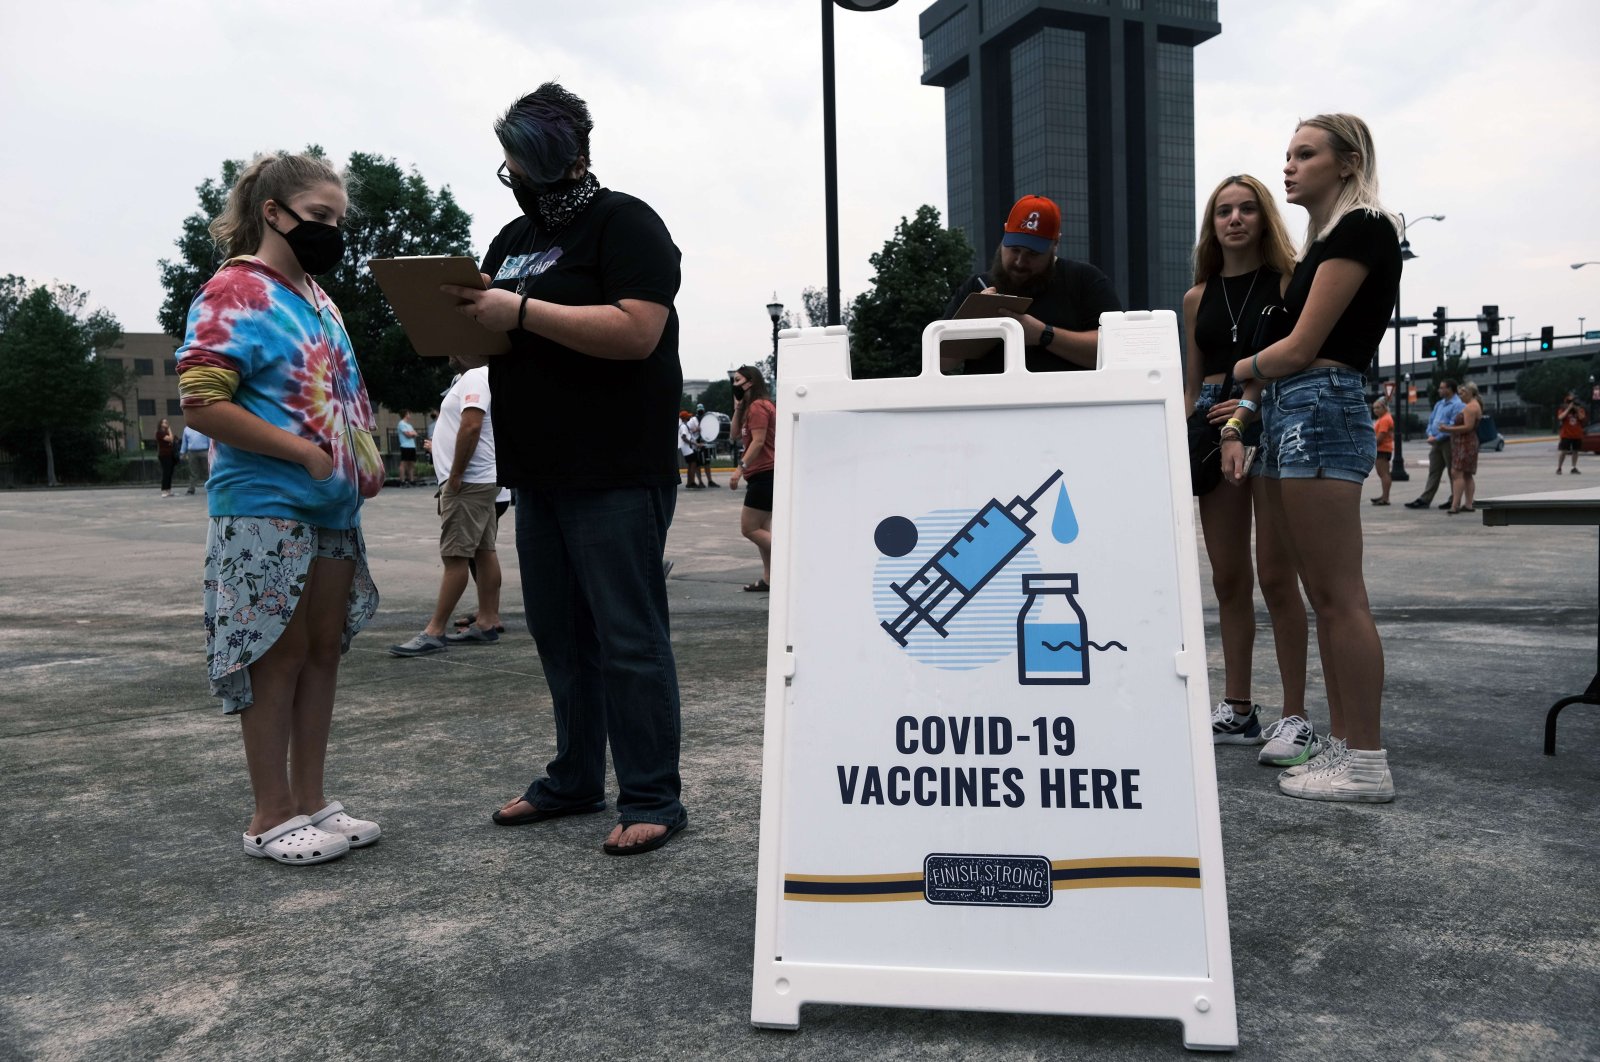 People wait to get vaccinated for COVID-19 at a baseball game in Springfield, Missouri, U.S., on Aug. 05, 2021. (Getty Images/AFP Photo)